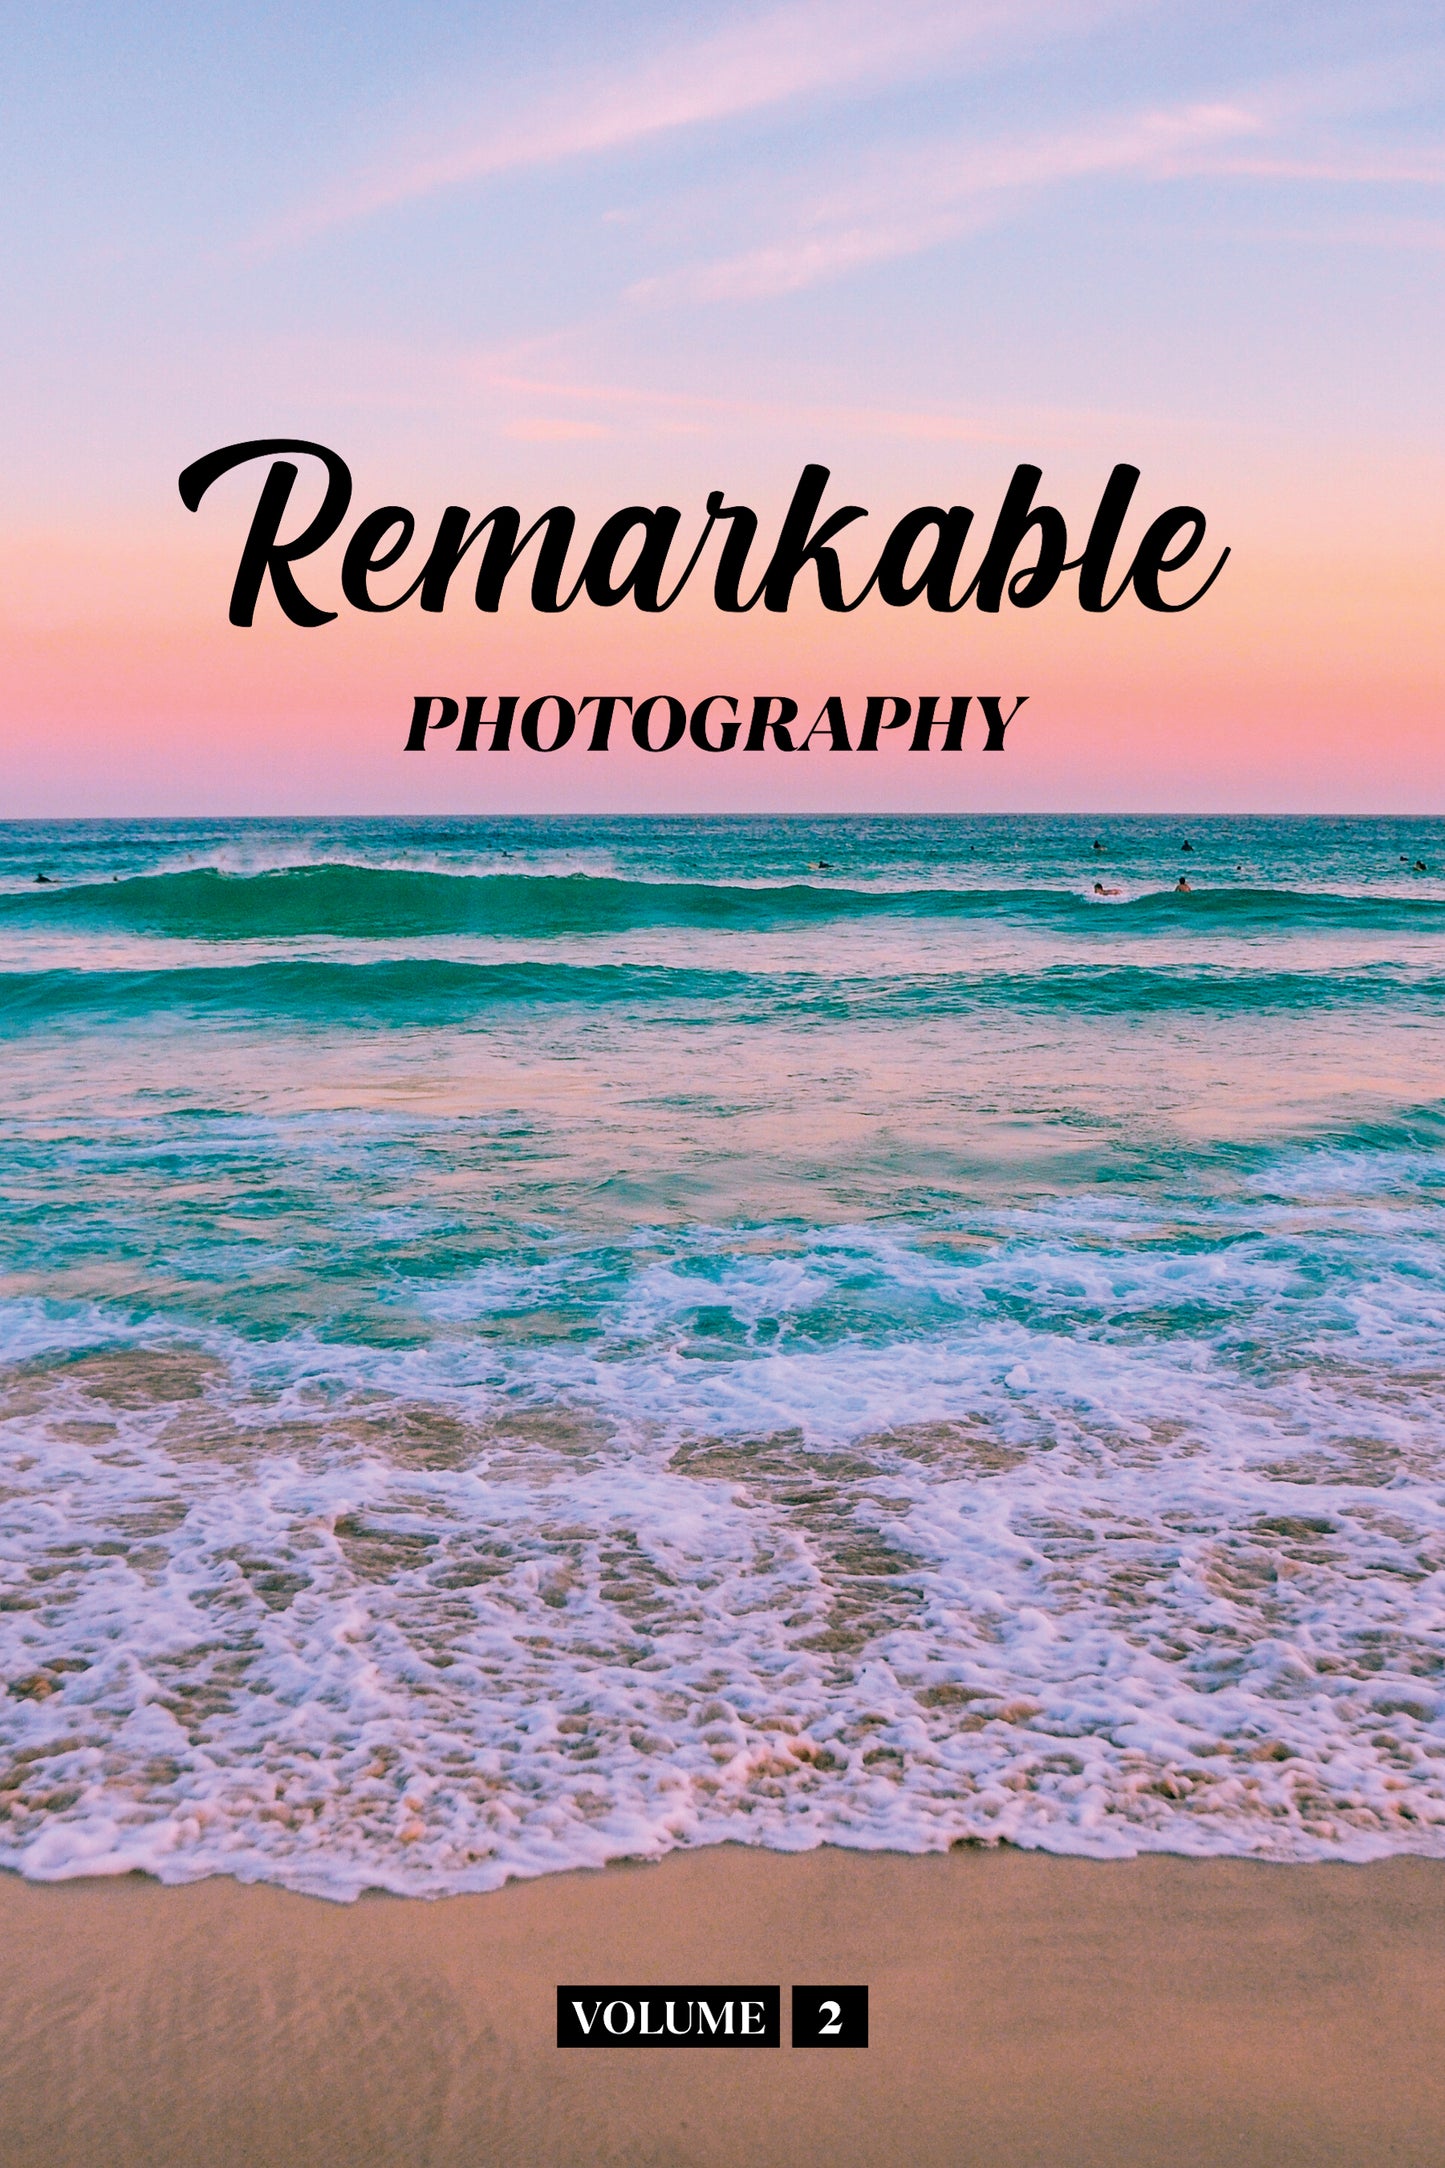 Remarkable Photography Volume 2 (Physical Book)